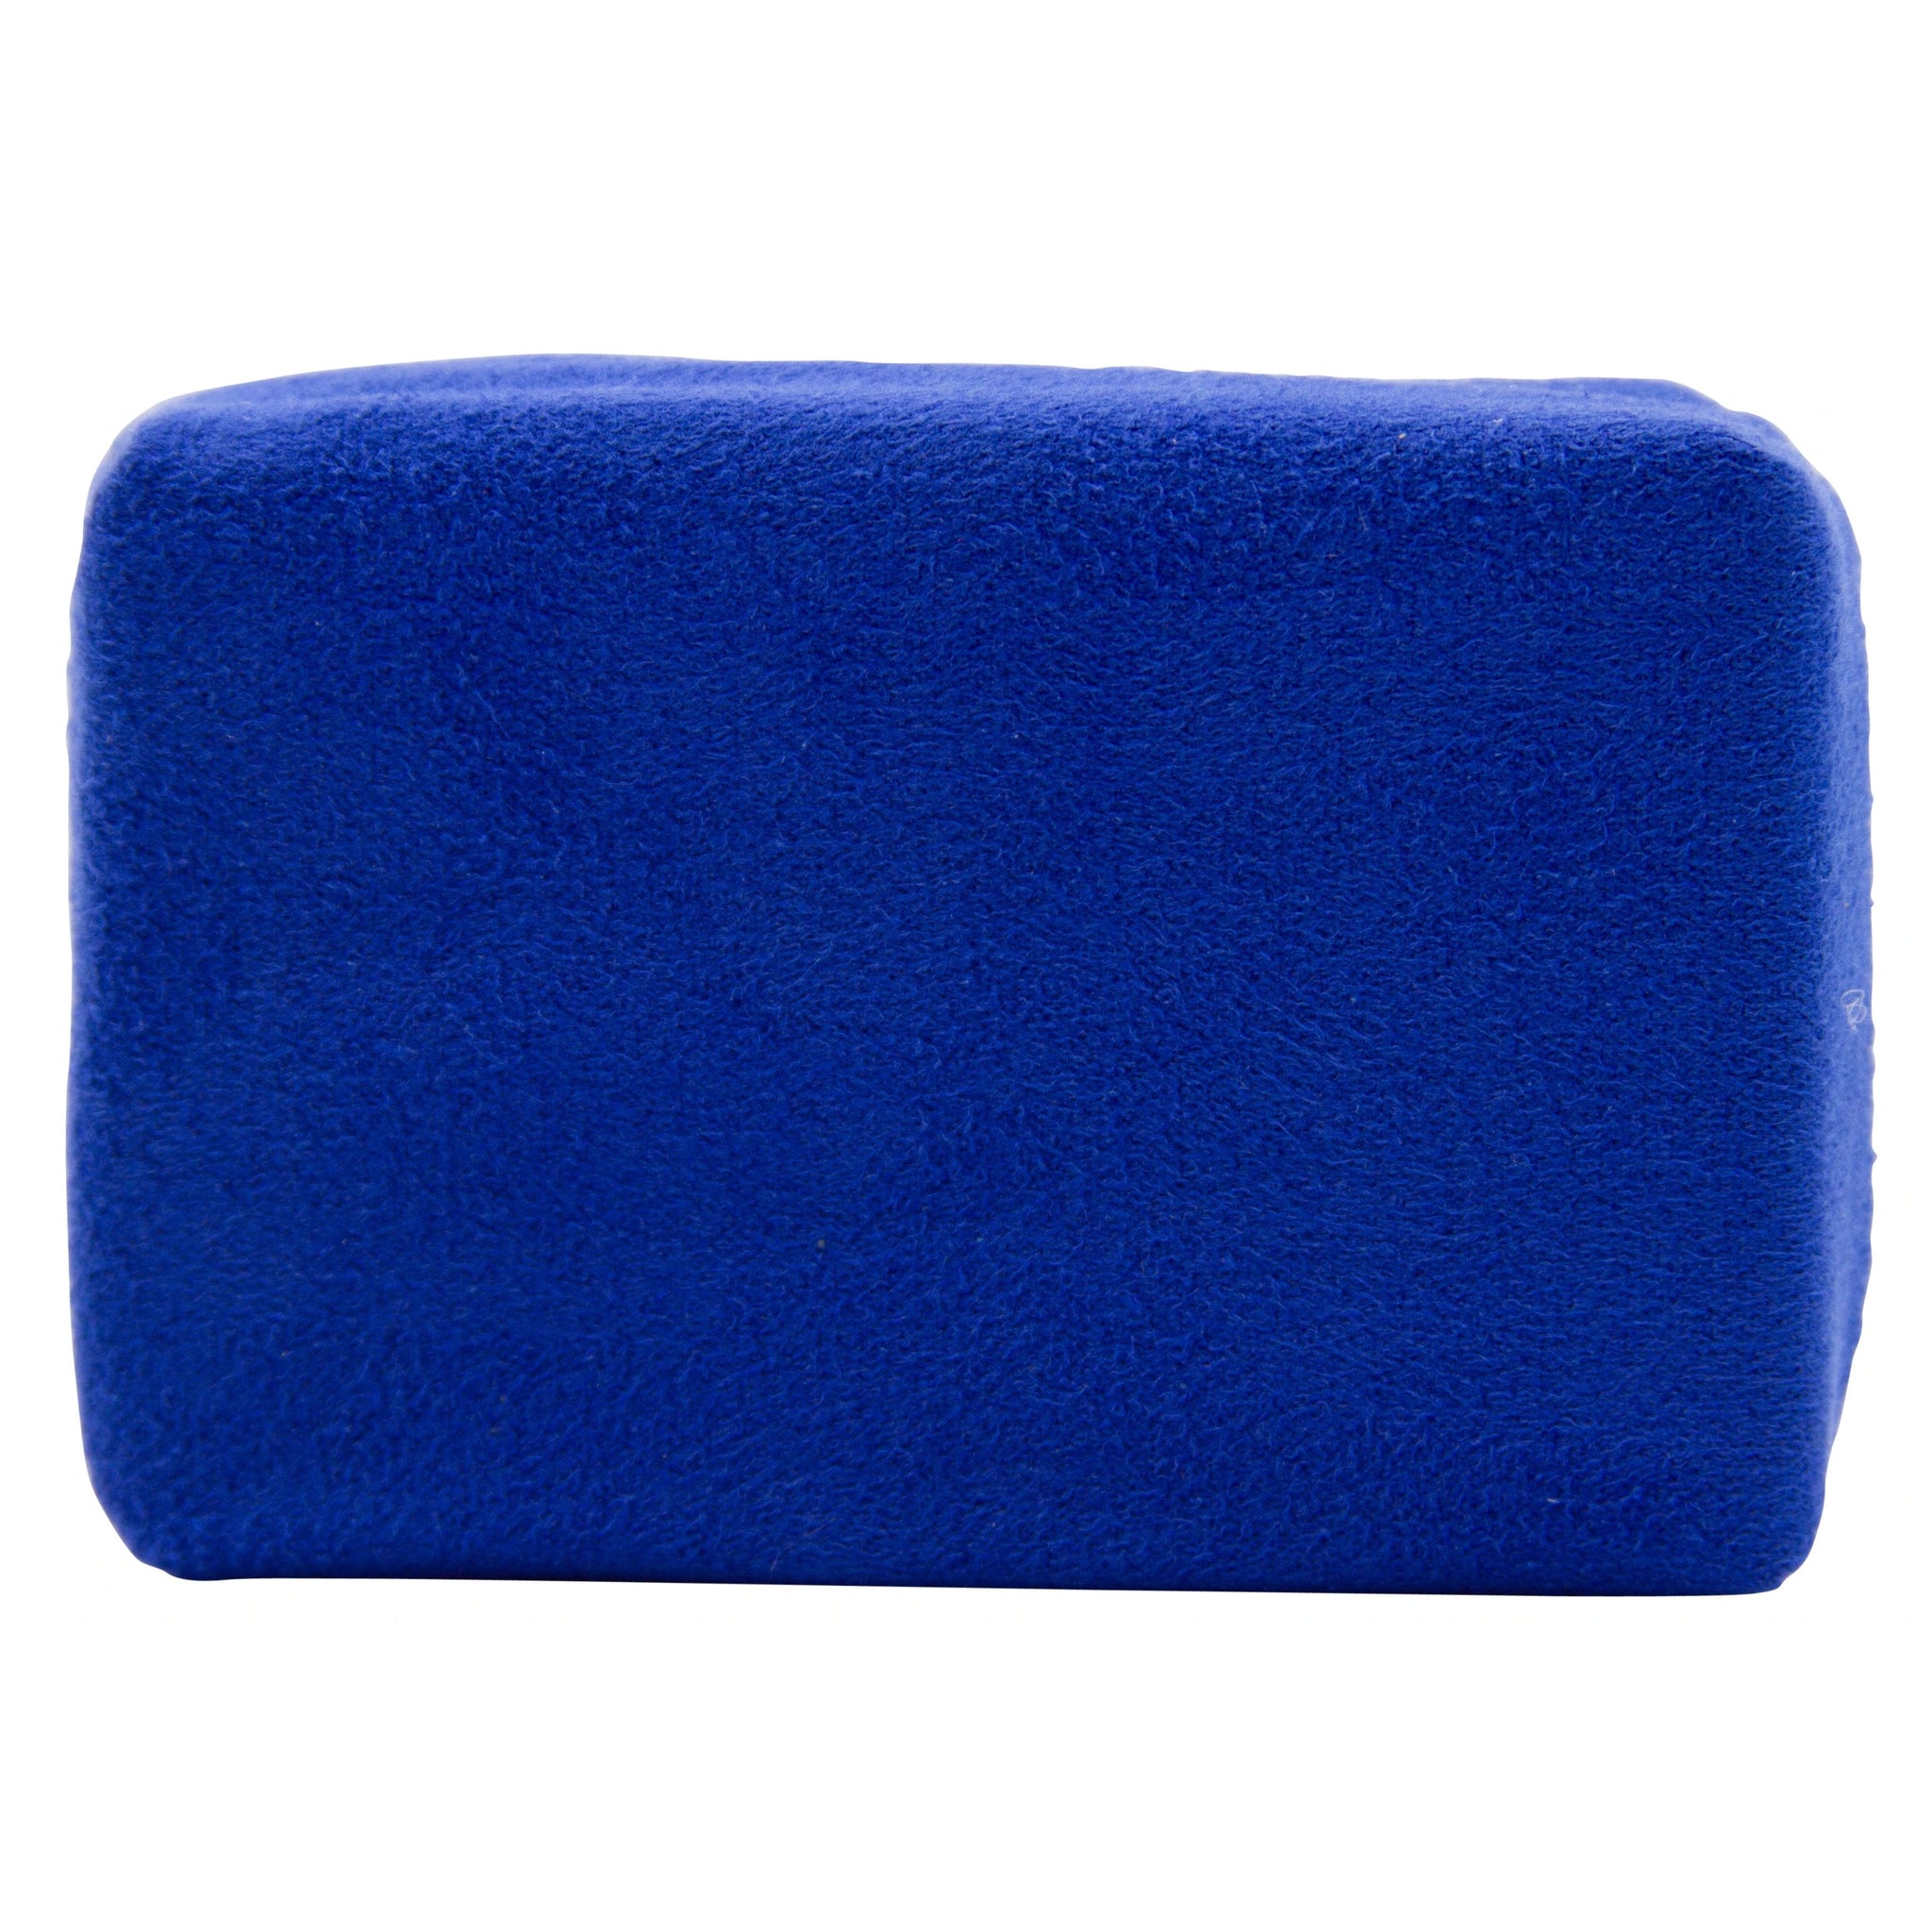  Greenway’s Car Care Products, Super Soft Blue Microfiber Suede Ceramic Coating Applicator, 4” x 2.5” x 1.25”, 2 pack, front face.